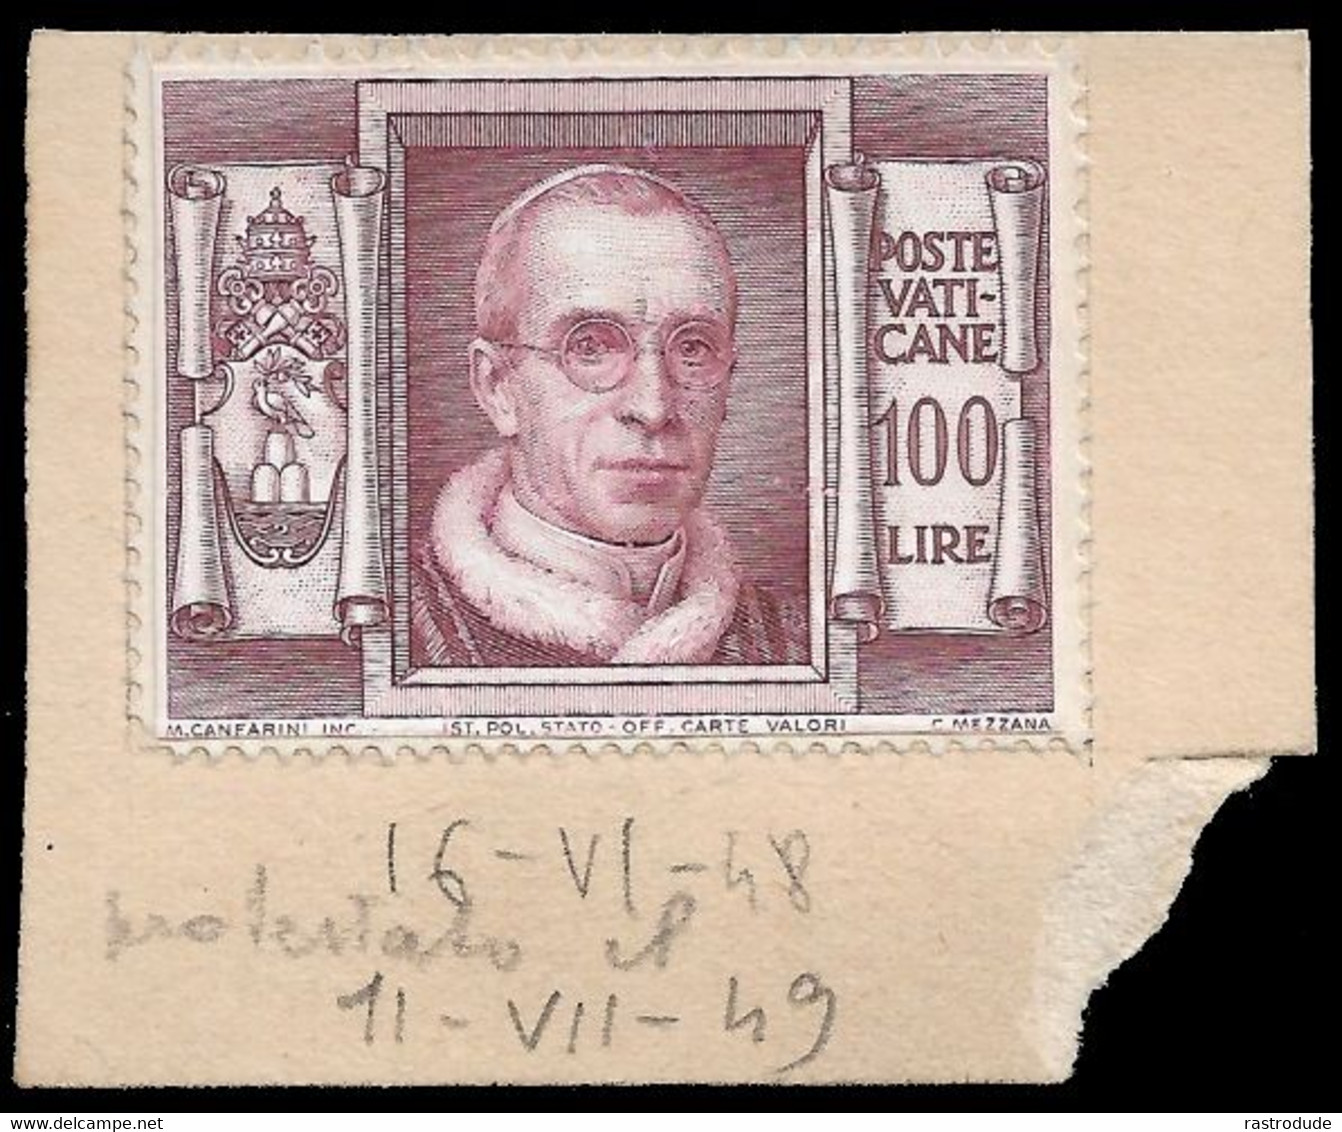 VATICAN CITY - 1948 VERY RARE PROOF / PROVE 100L (Sassone 131) NOT ISSUED COLOR - POPE PIUS XII - Neufs